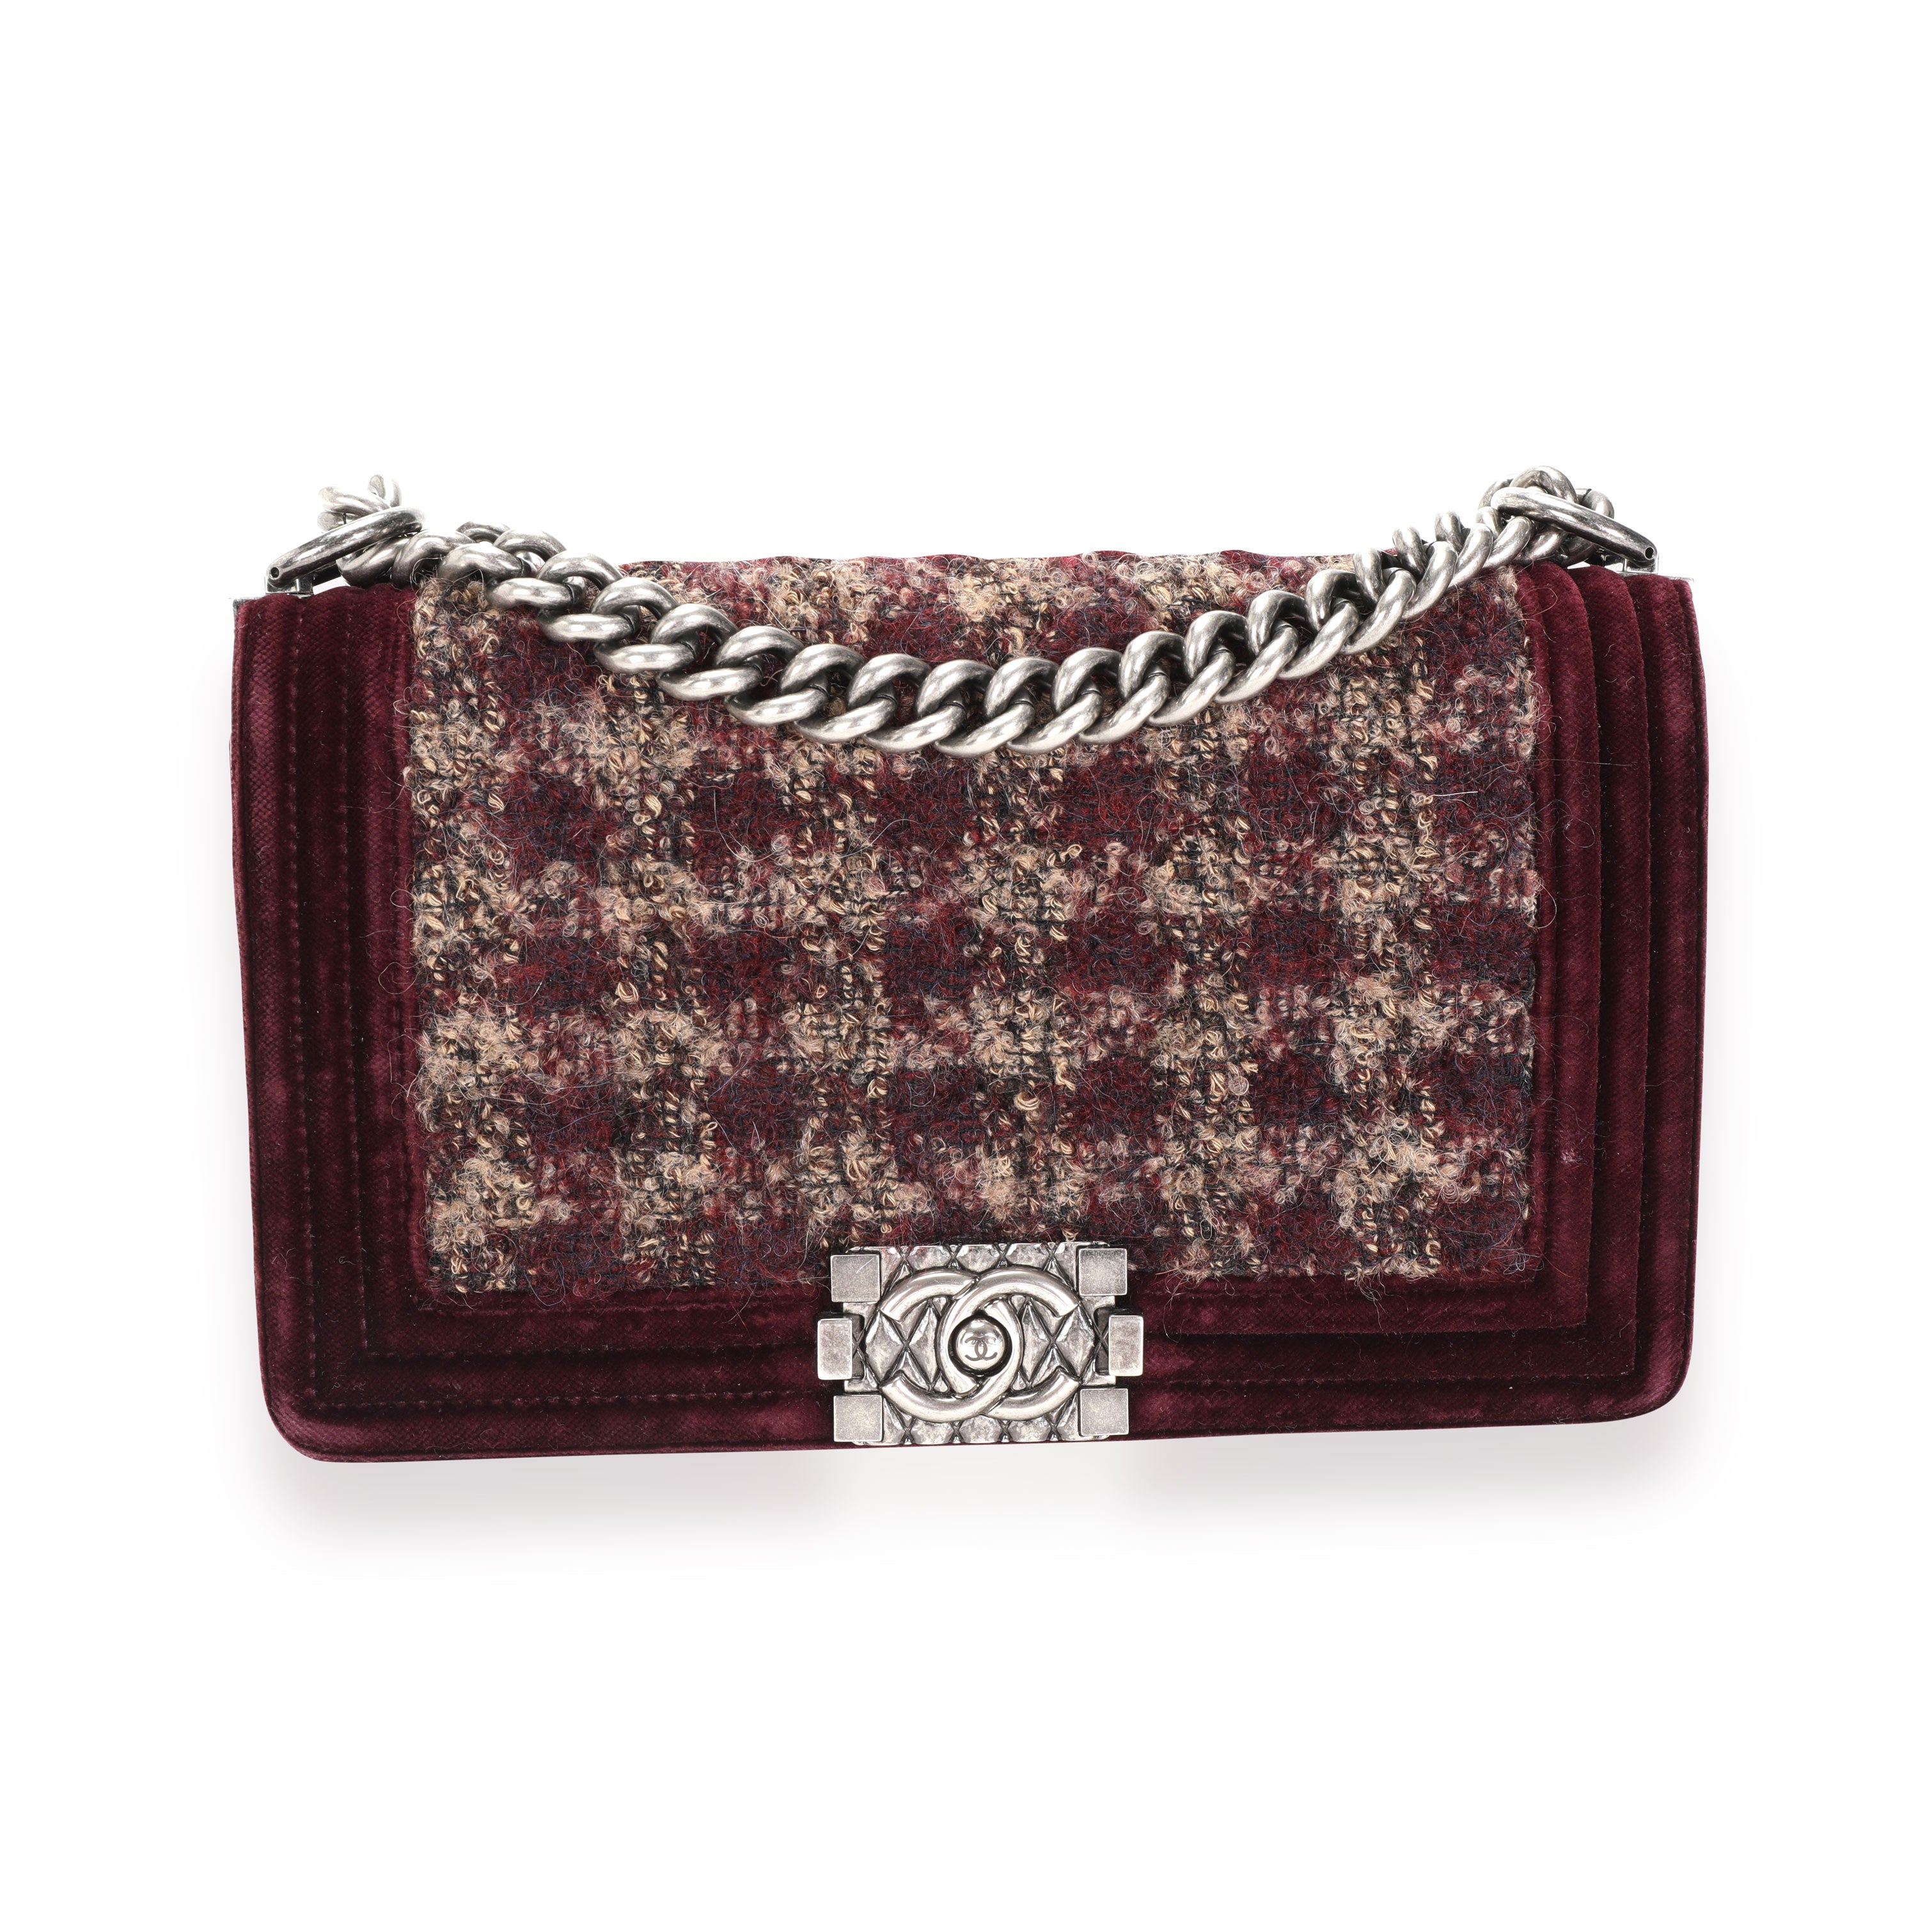 Elegant Velvet Burgundy Velvet Evening Bag For Weddings And Parties Luxury  Clutch Tote With Wallet And Handbag Purse For Brides And Feminine Bolsa  Clutches From Liantiku, $24 | DHgate.Com